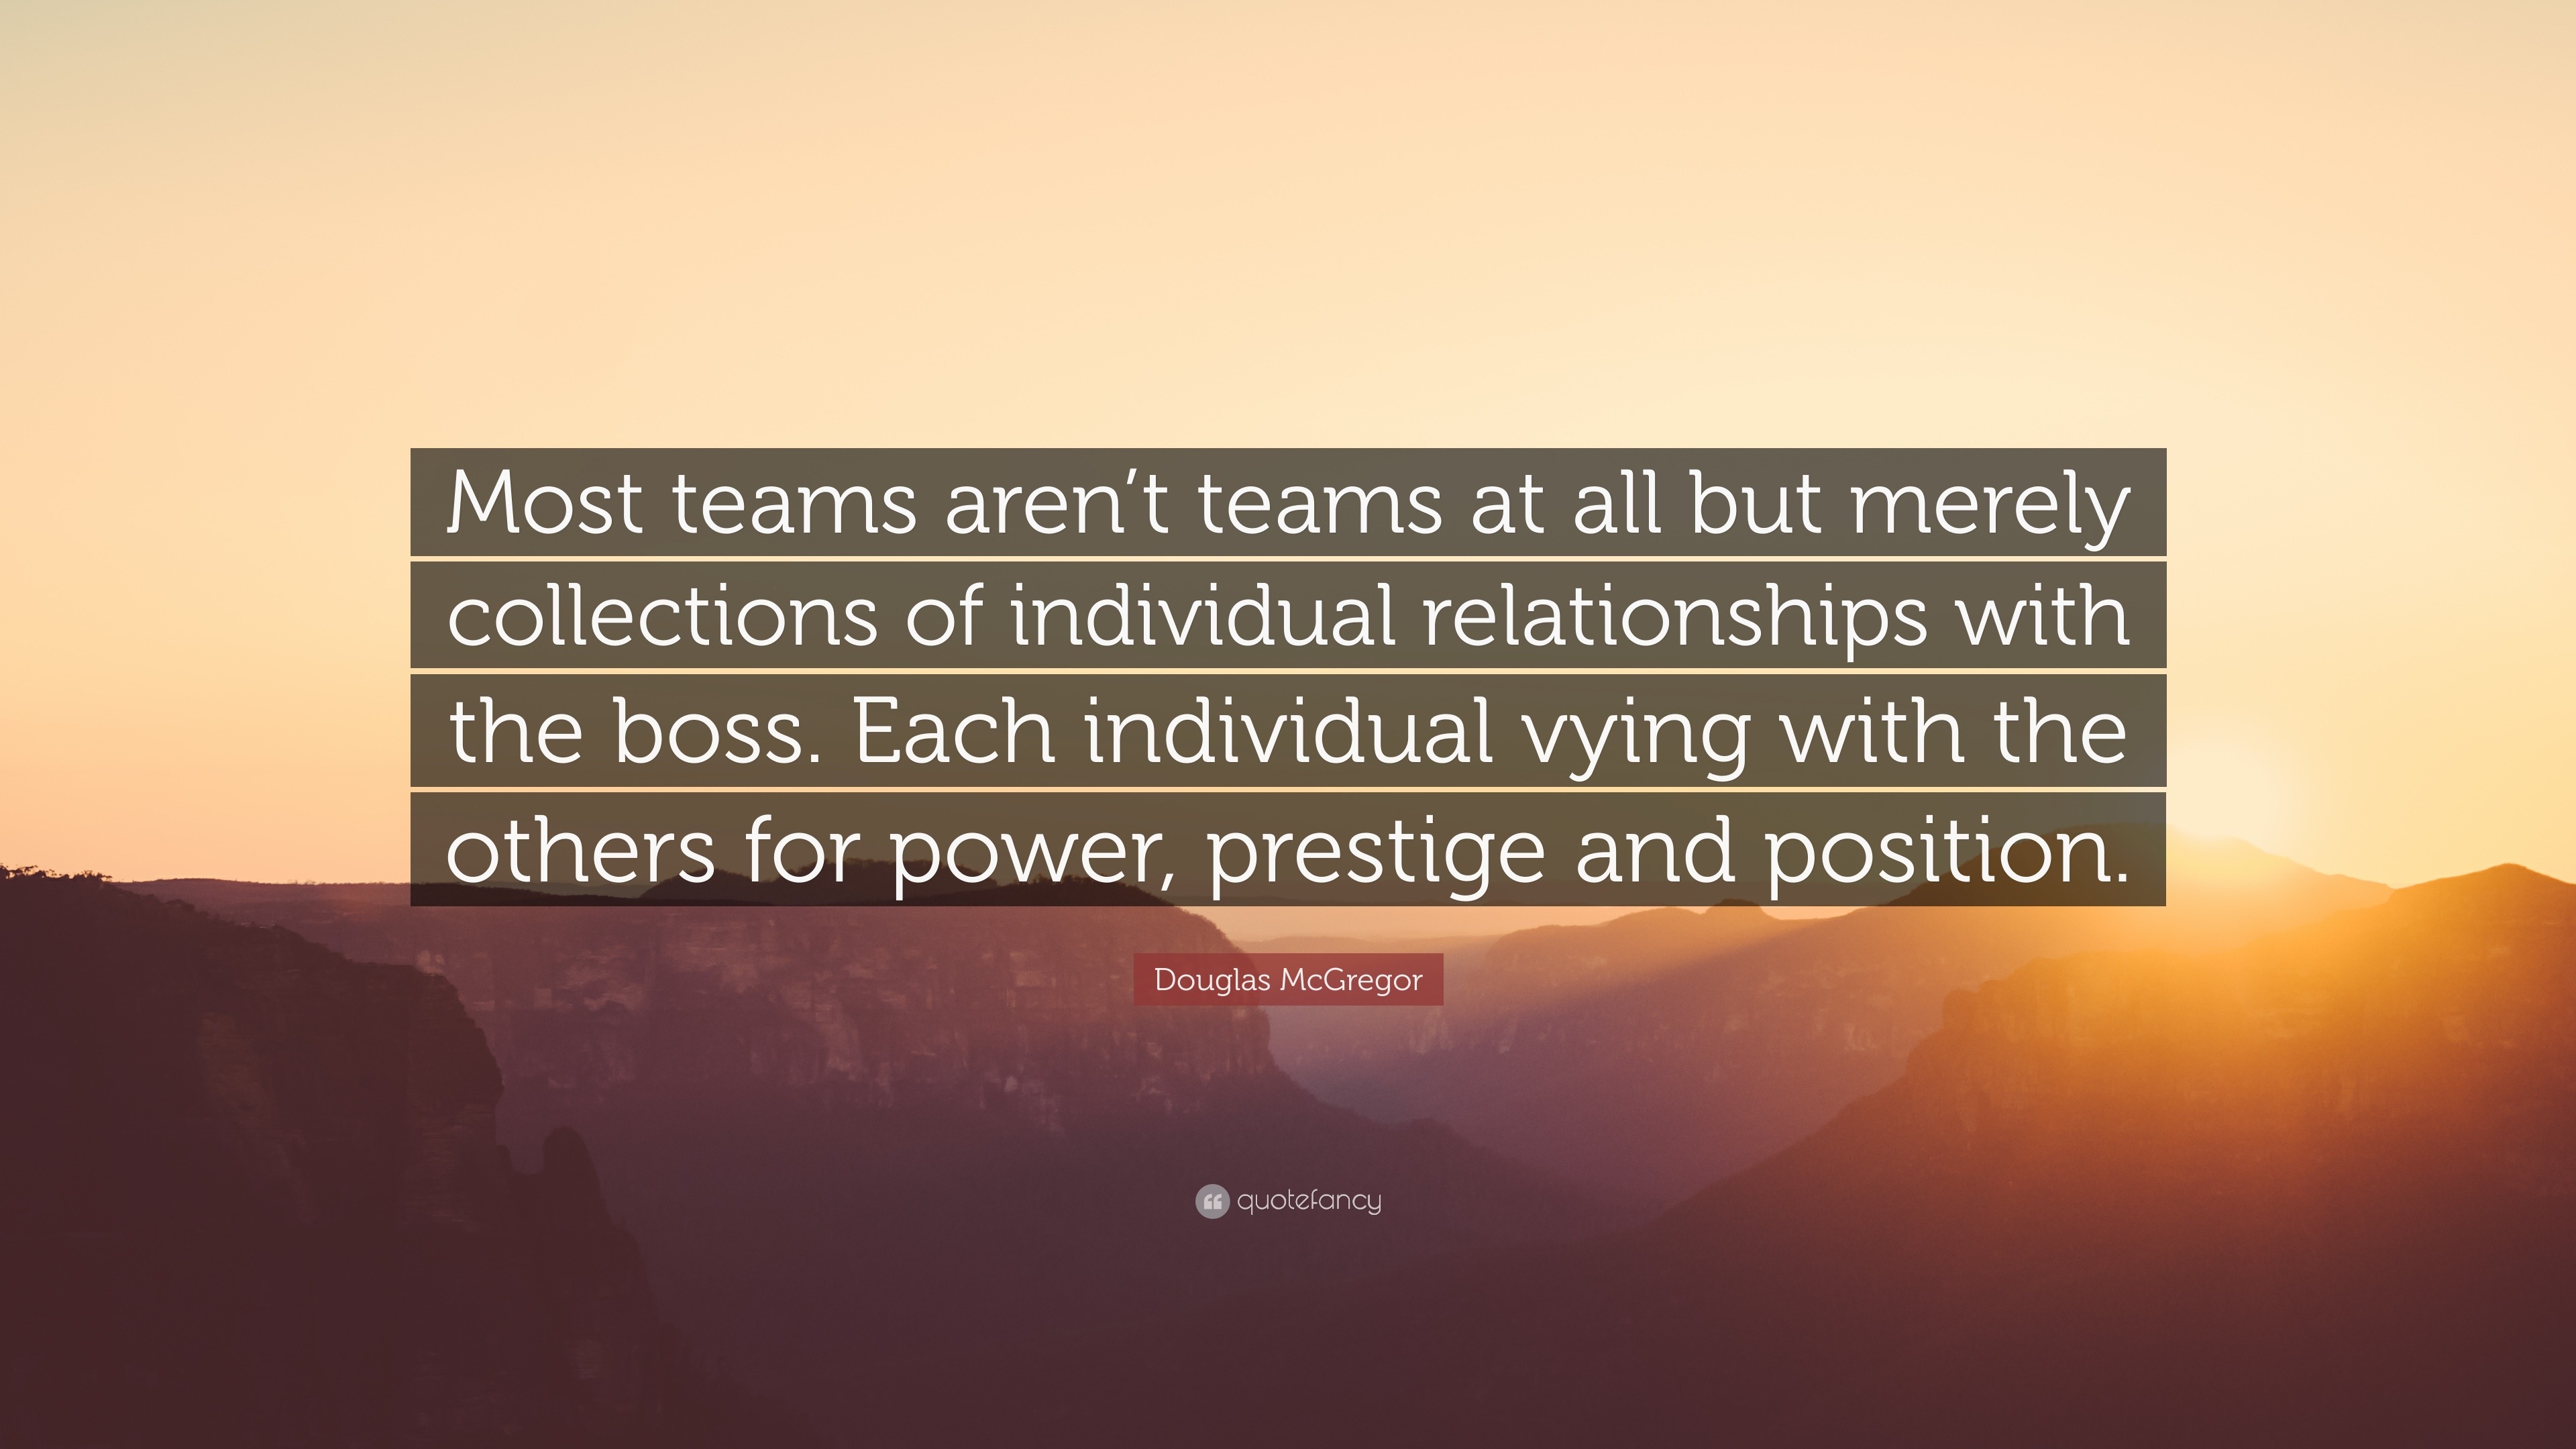 Douglas McGregor Quote: “Most teams aren’t teams at all but merely